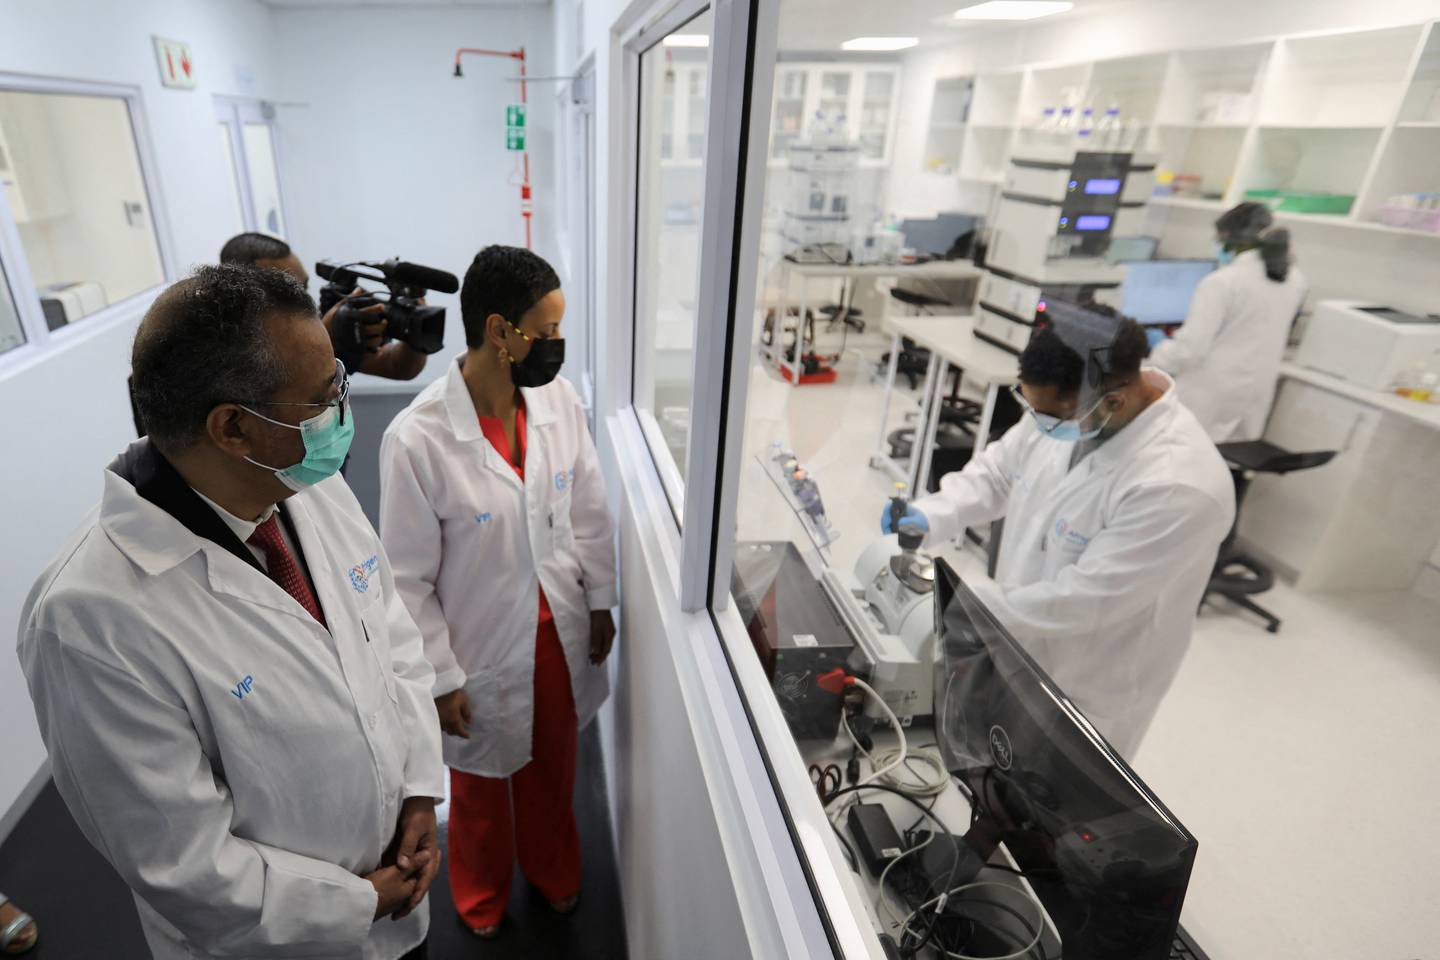 Tedros Adhanom Ghebreyesus and Belgium's Minister of Development Cooperation Meryame Kitir visit a WHO-backed mRNA vaccine hub in Cape Town, South Africa.